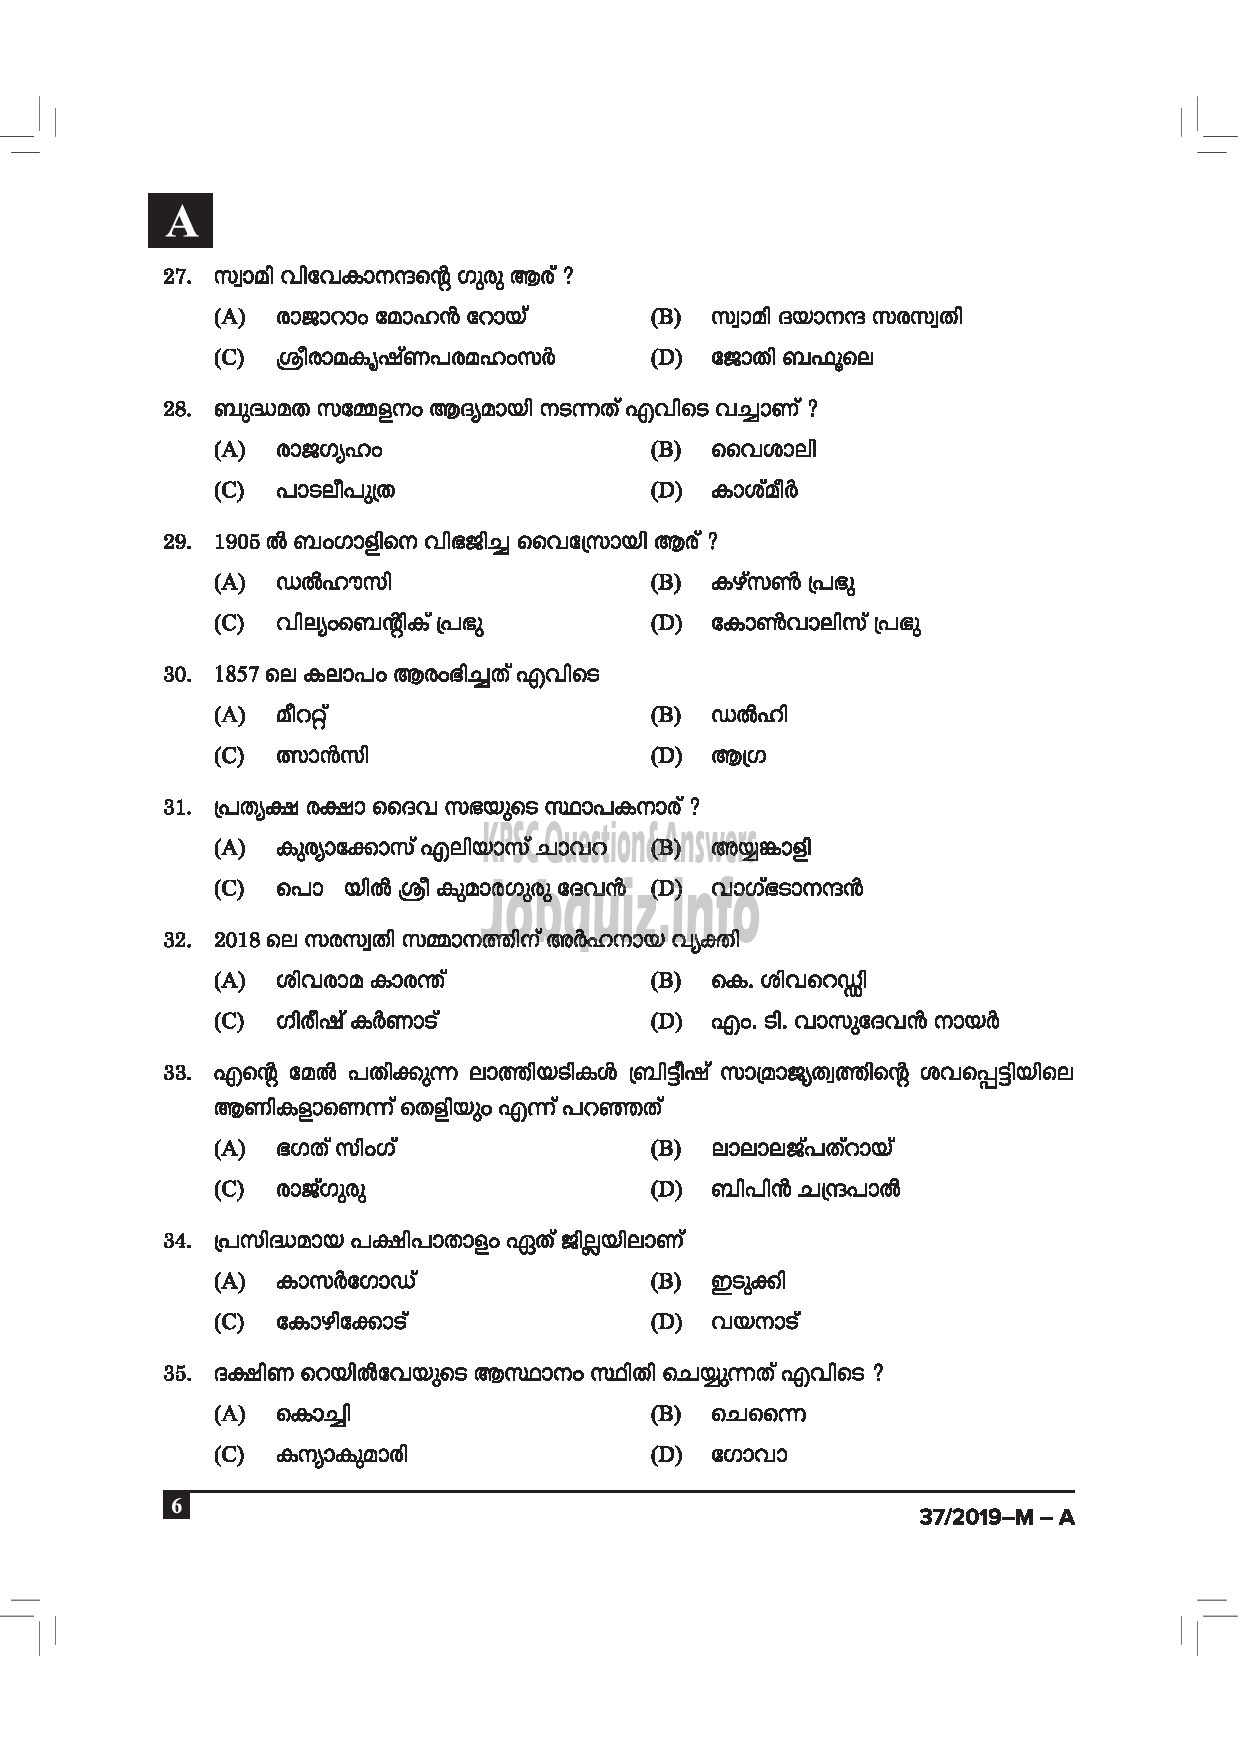 Kerala PSC Question Paper - DRIVER CUM OFFICE ATTENDANT / POLICE CONSTABLE DRIVER GOVT OWNED COMP / CORP / BOARD / POLICE MALAYALAM -6